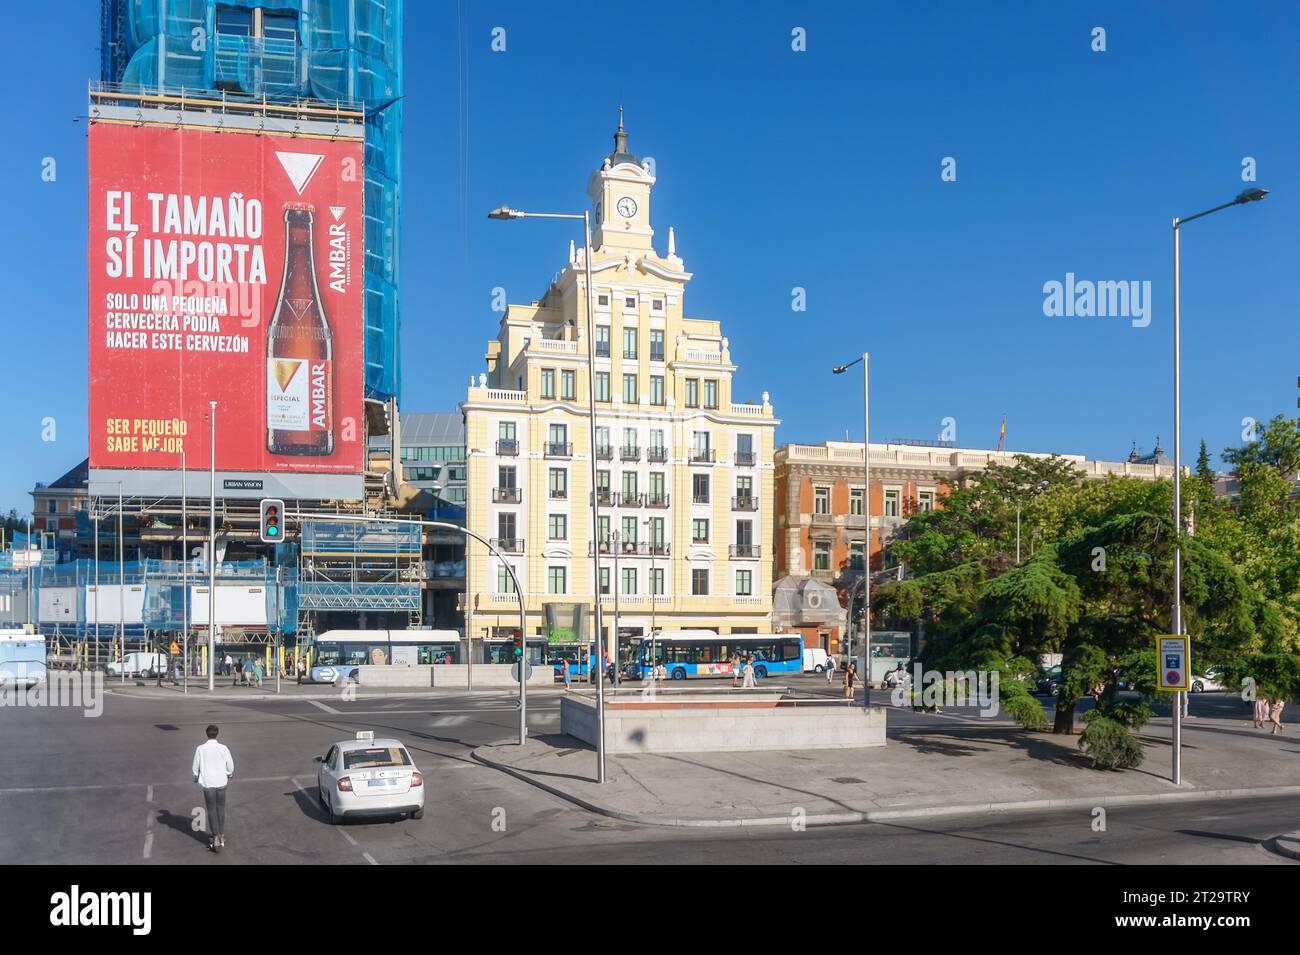 Madrid, Spain, High angle view of the CA Indosuez Wealth (Spanish: Edificio Credit Agricole IndoSuez). A large advertisement billboard for Amber beer Stock Photo